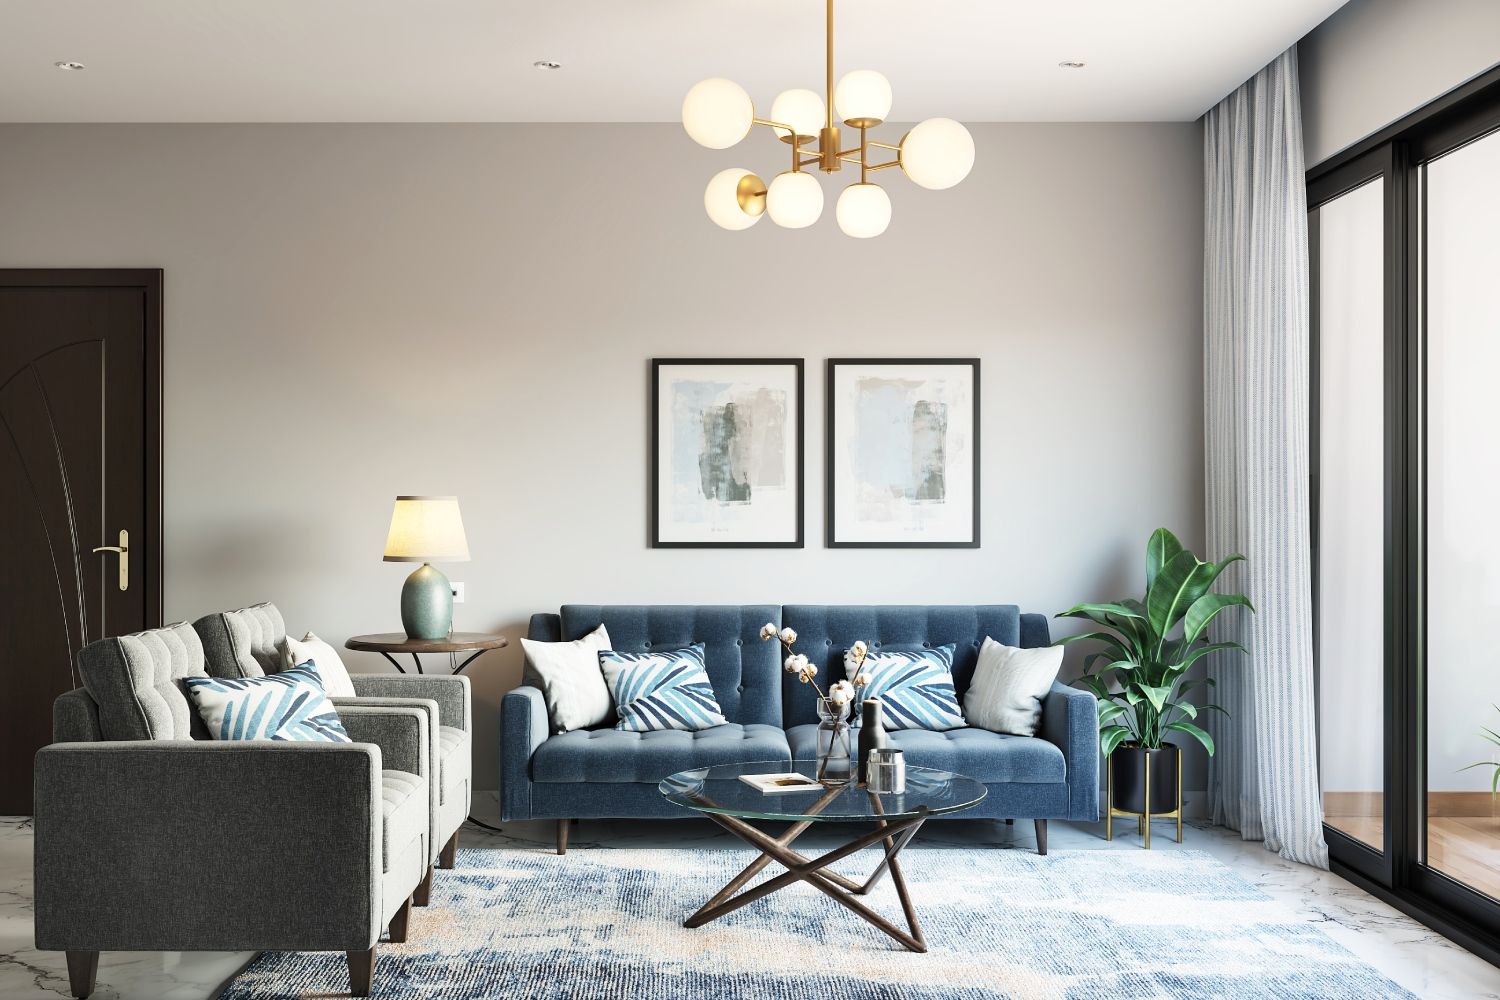 Modern Living Room Design With Blue 3-Seater Sofa And Grey Accent Wall